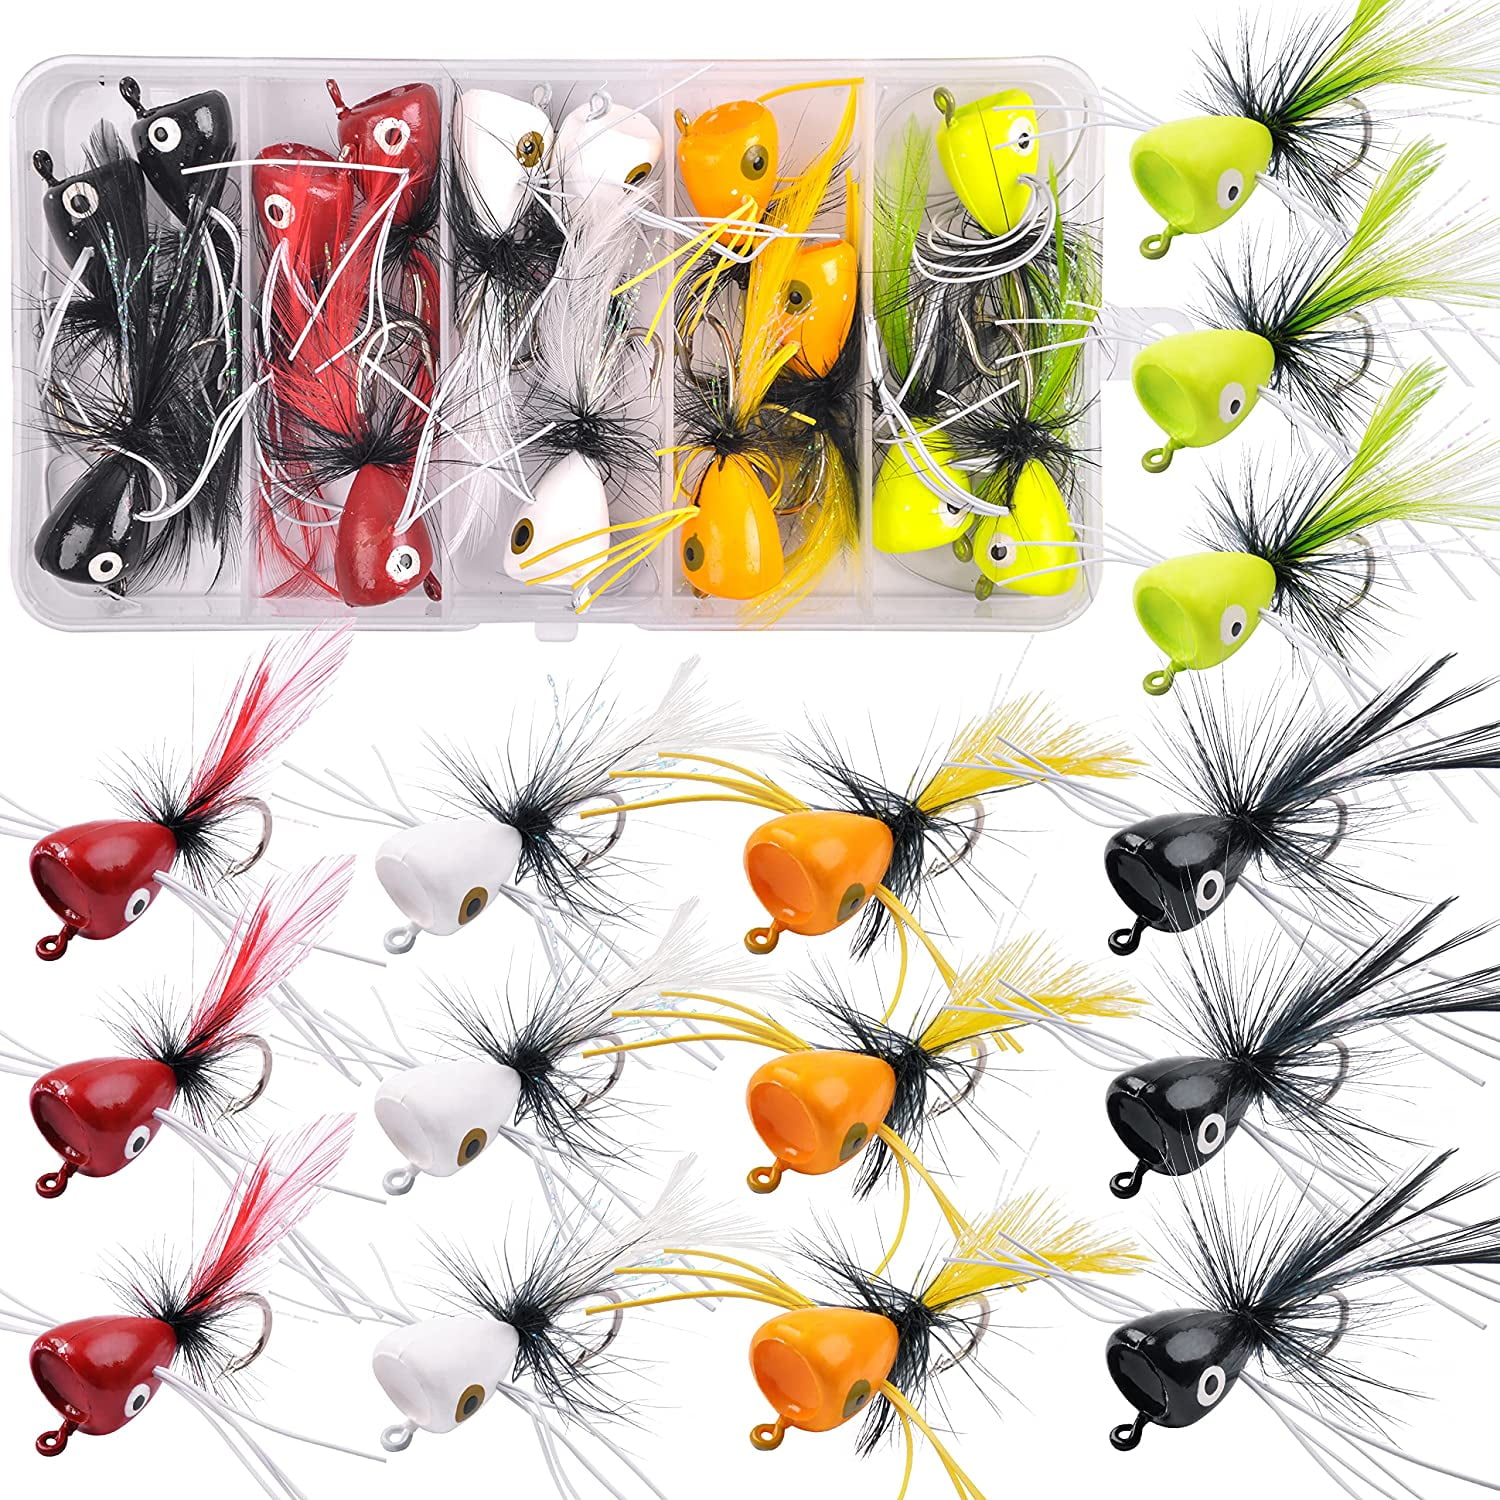 Best Sellers – X Zone Lures